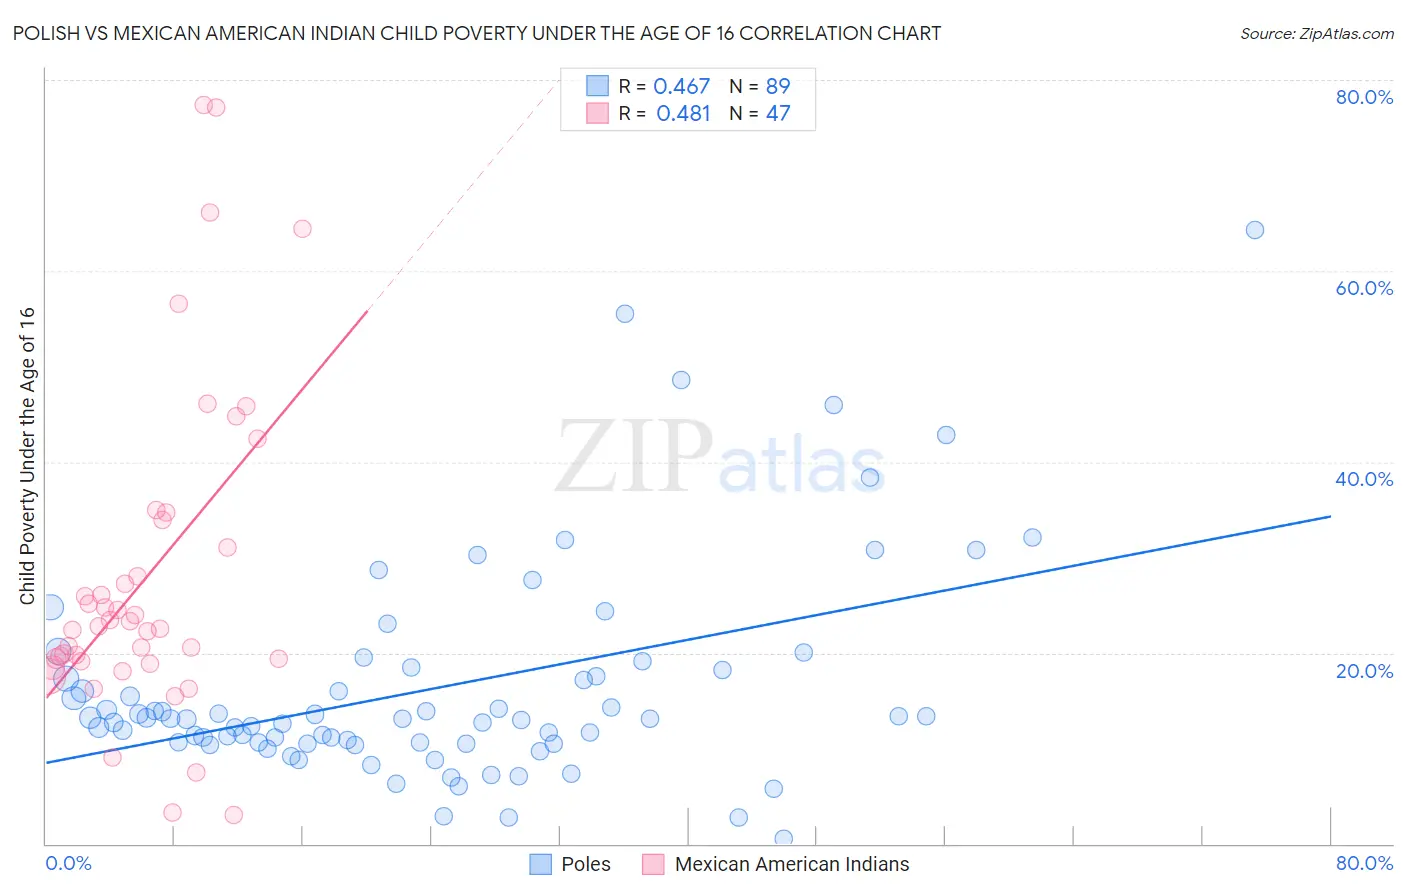 Polish vs Mexican American Indian Child Poverty Under the Age of 16